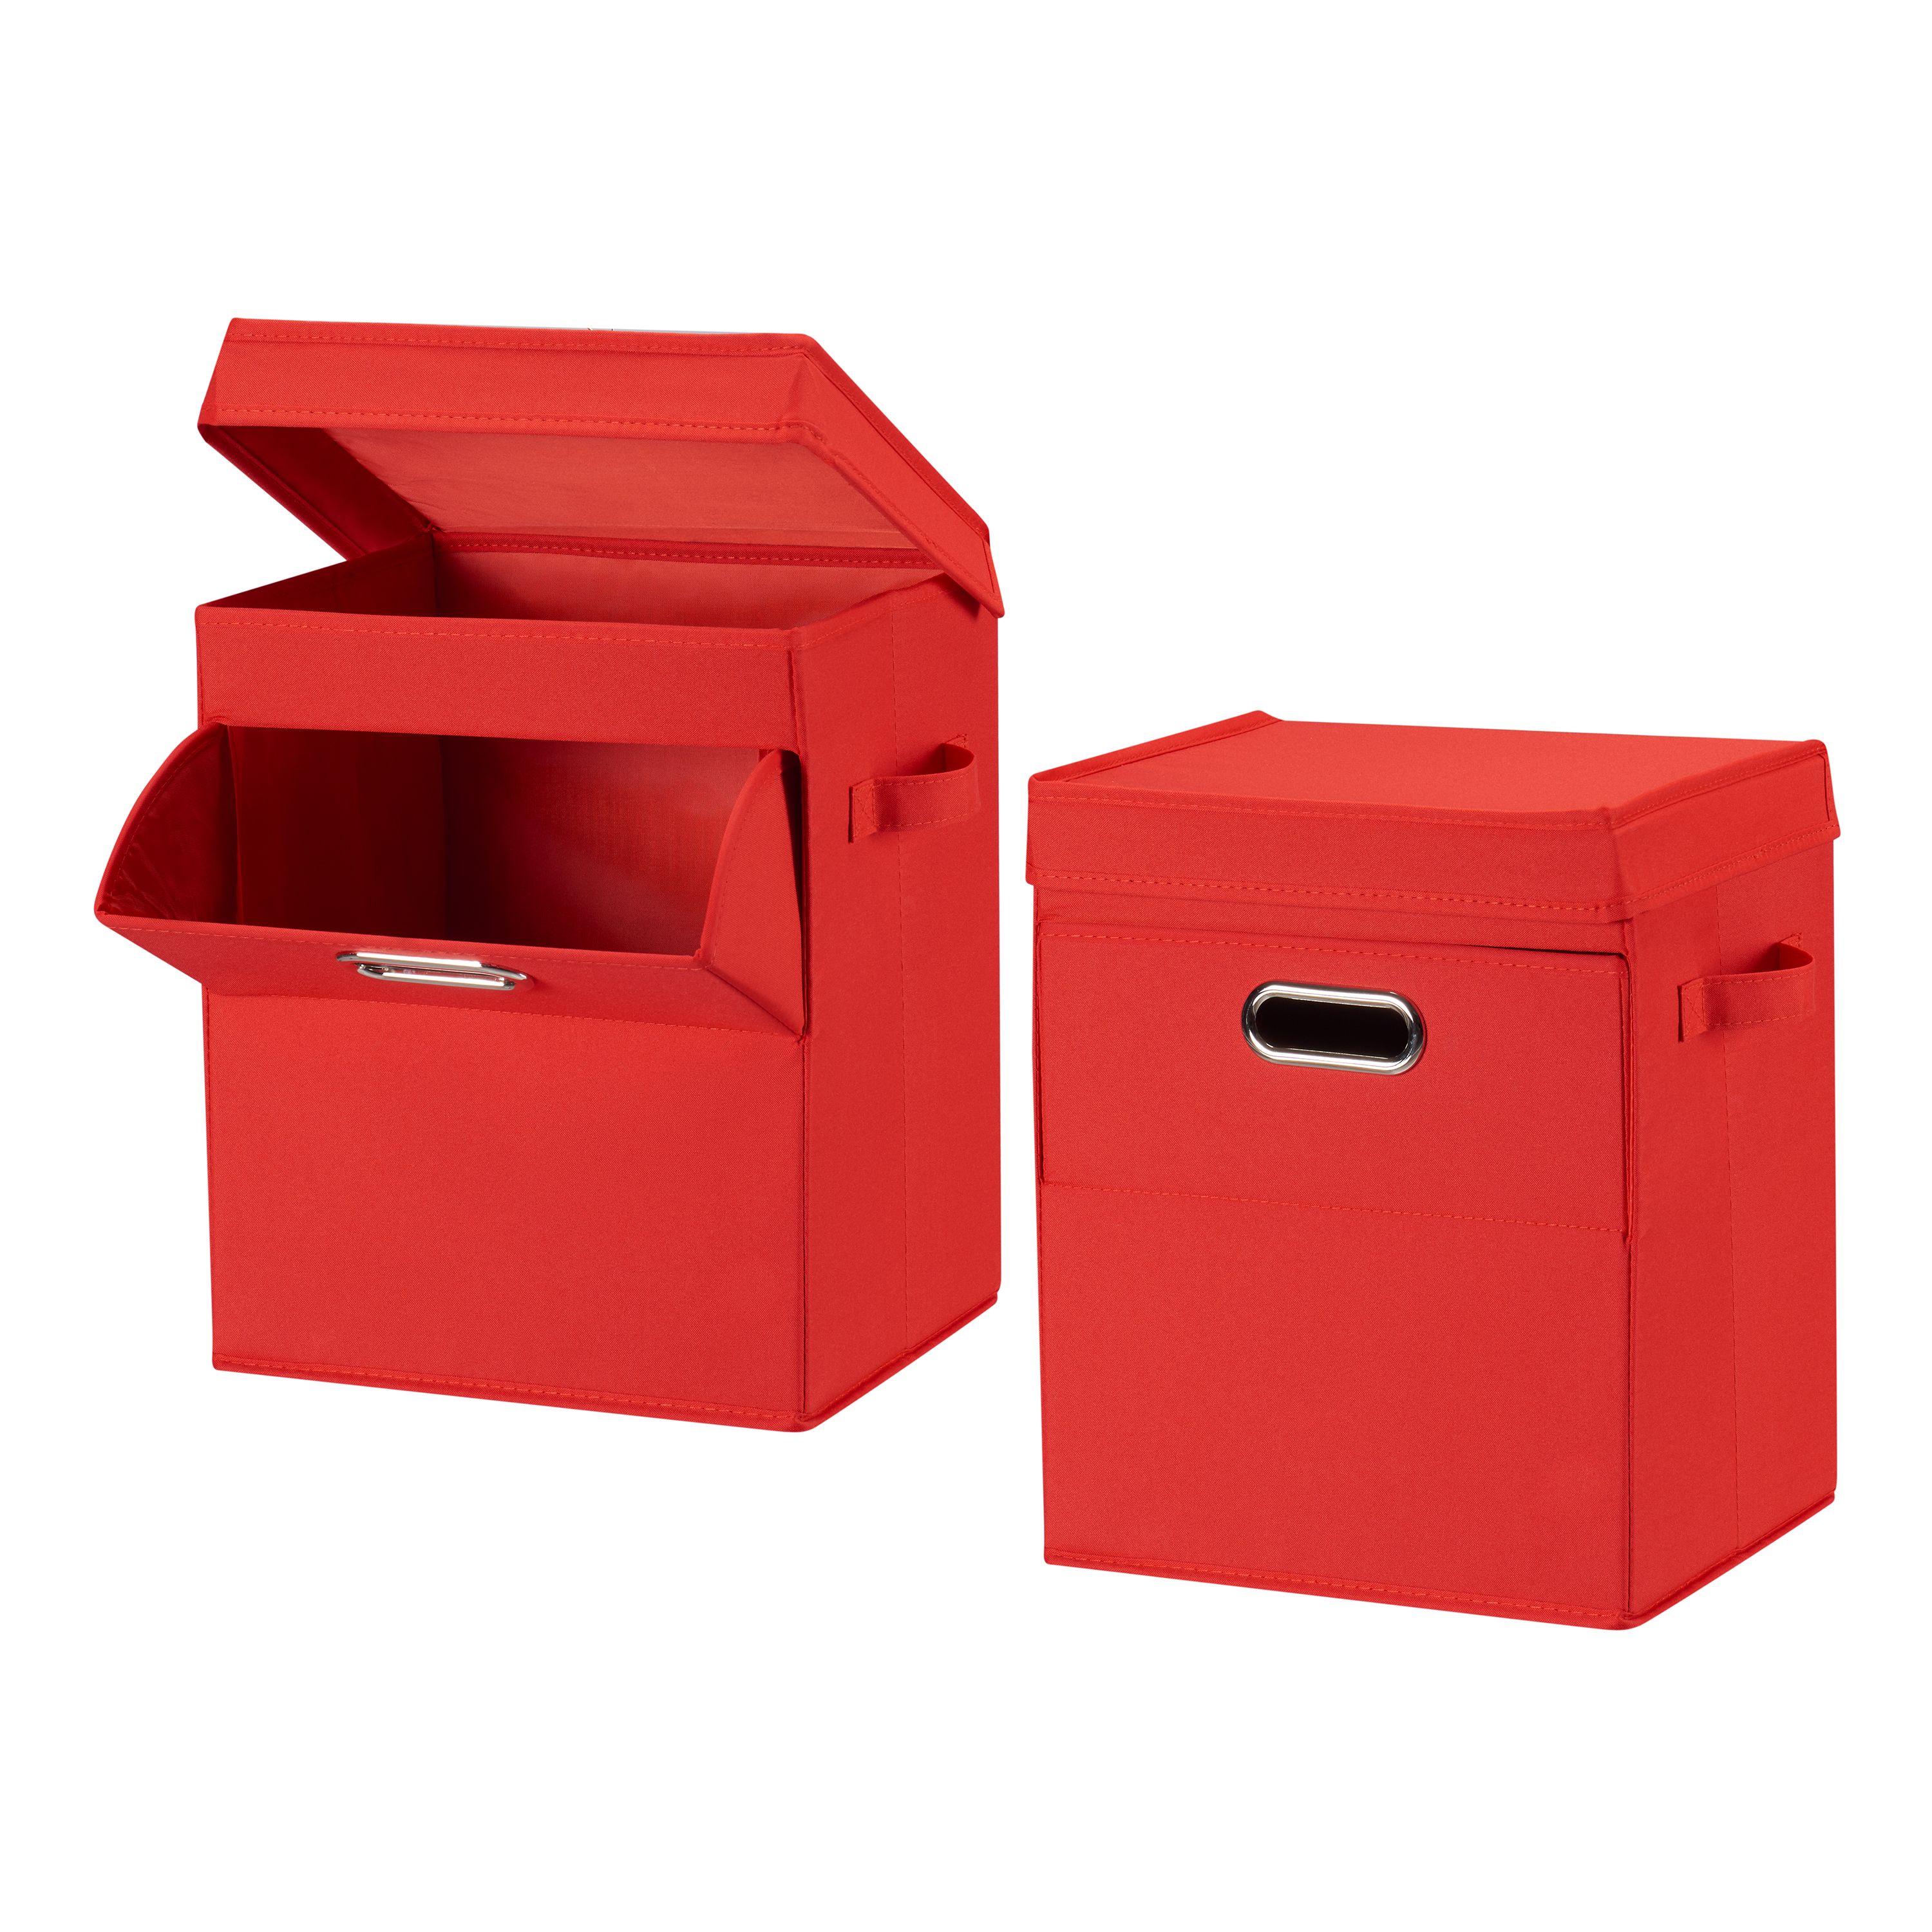 Mainstays Front Loading Stackable Laundry Hamper with Lid, Red, 2 Pack - image 1 of 4